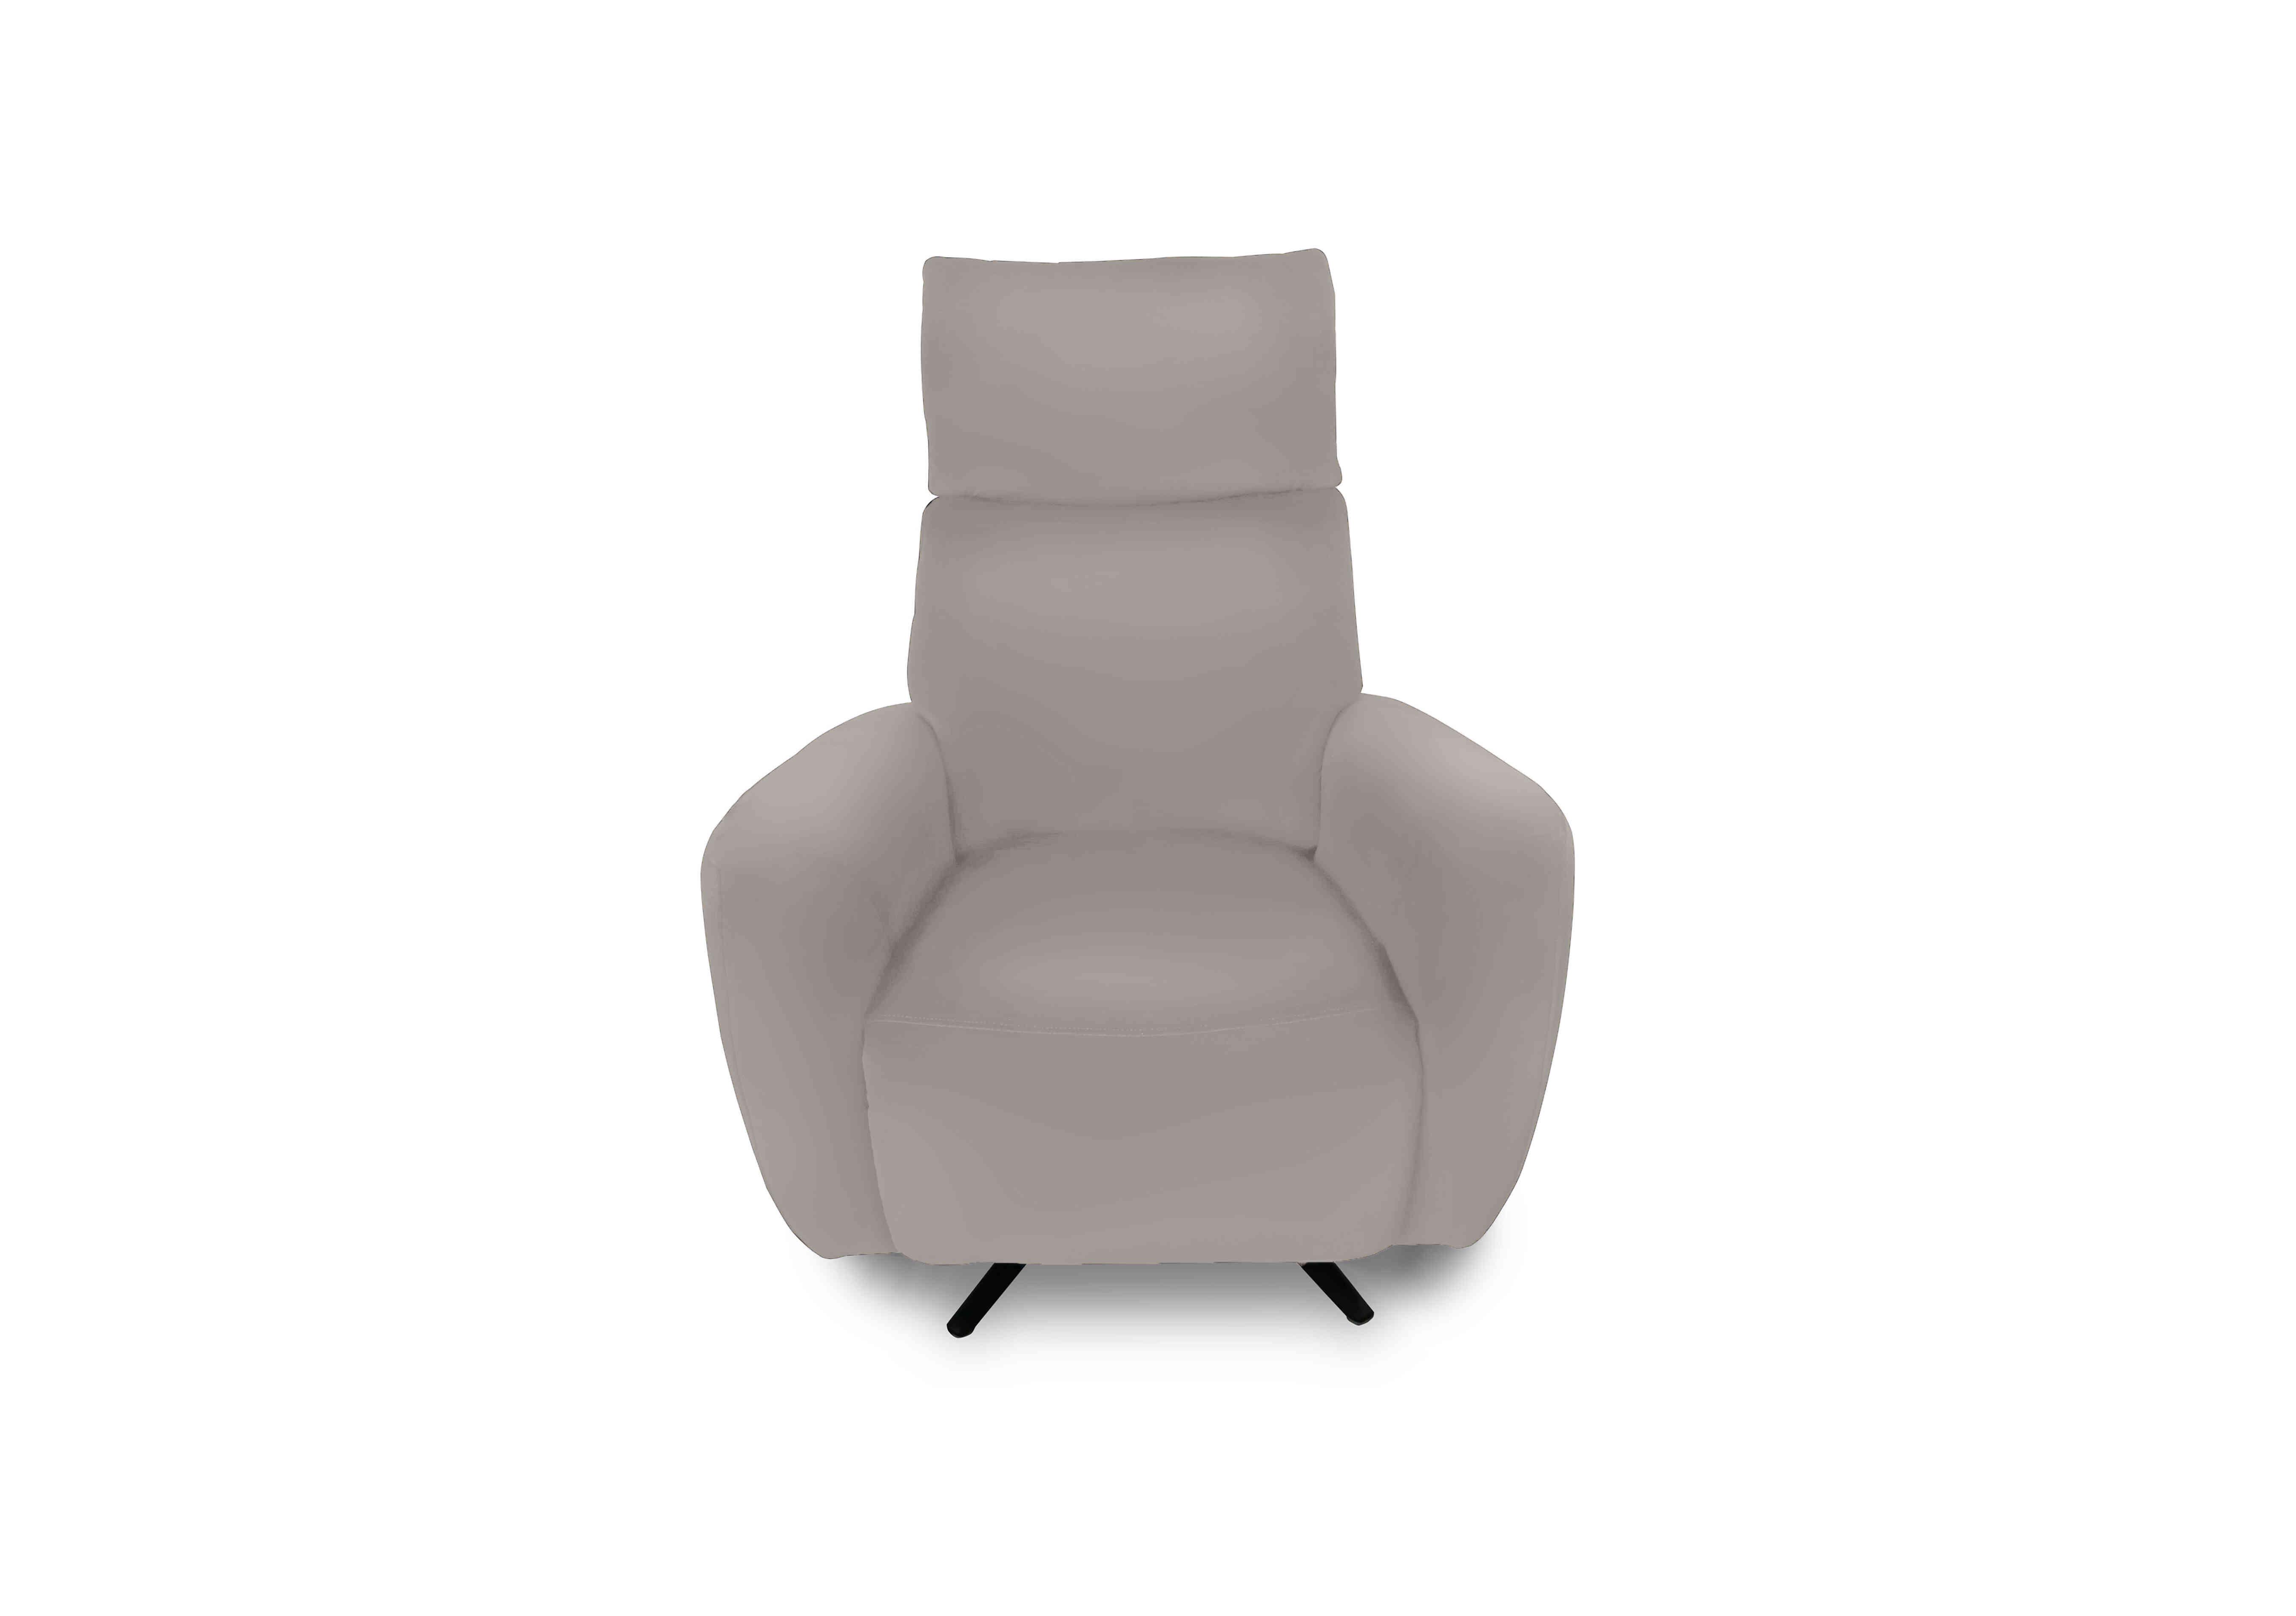 Designer Chair Collection Granada Leather Power Recliner Swivel Chair with Massage Feature in Bv-946b Silver Grey on Furniture Village